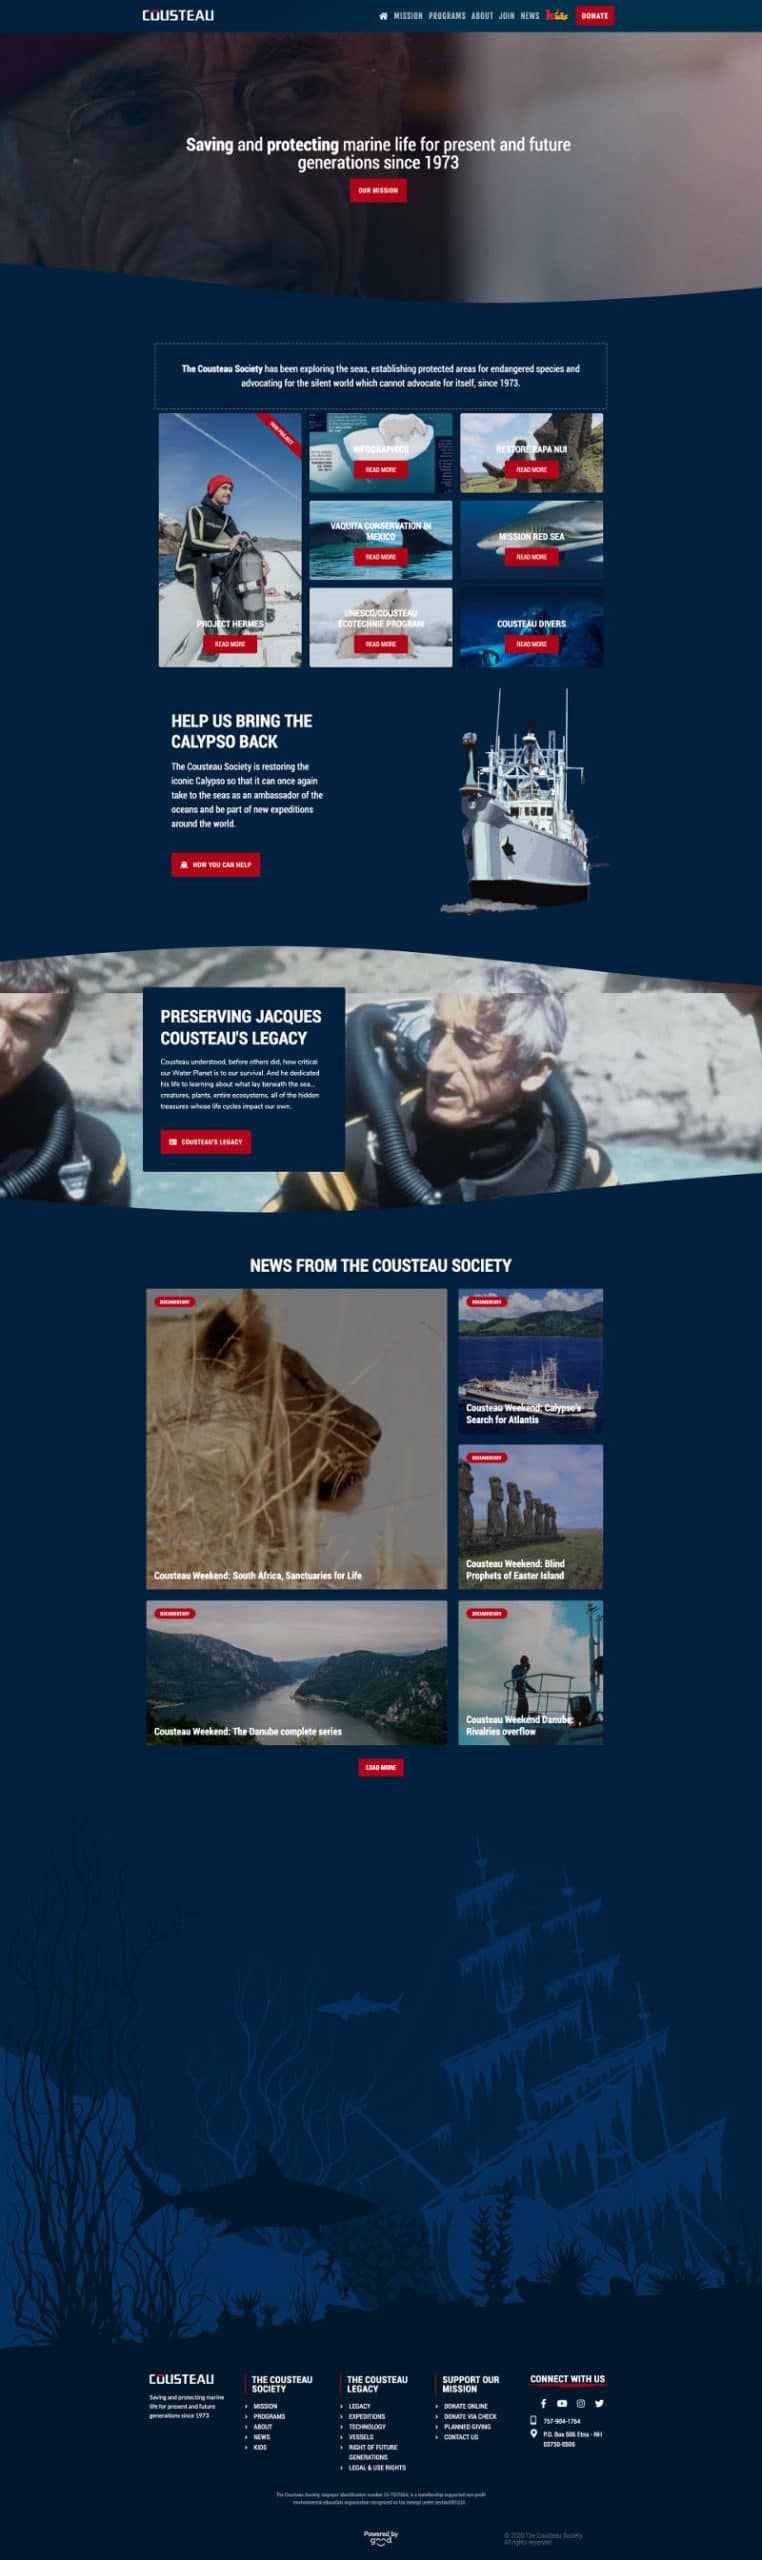 Jacques Cousteau - The Cousteau Society wordpress website designed and developed by Good Agency. Good Agency can help nonprofit teams with: Nonprofit WordPress development, Wordpress design, UX improvements, architecture design, UX consulting, SEO, SEM, nonprofit marketing. Good agency specializes in nonprofit website design and nonprofit digital marketing, online fundraising and growth marketing. Request a quote